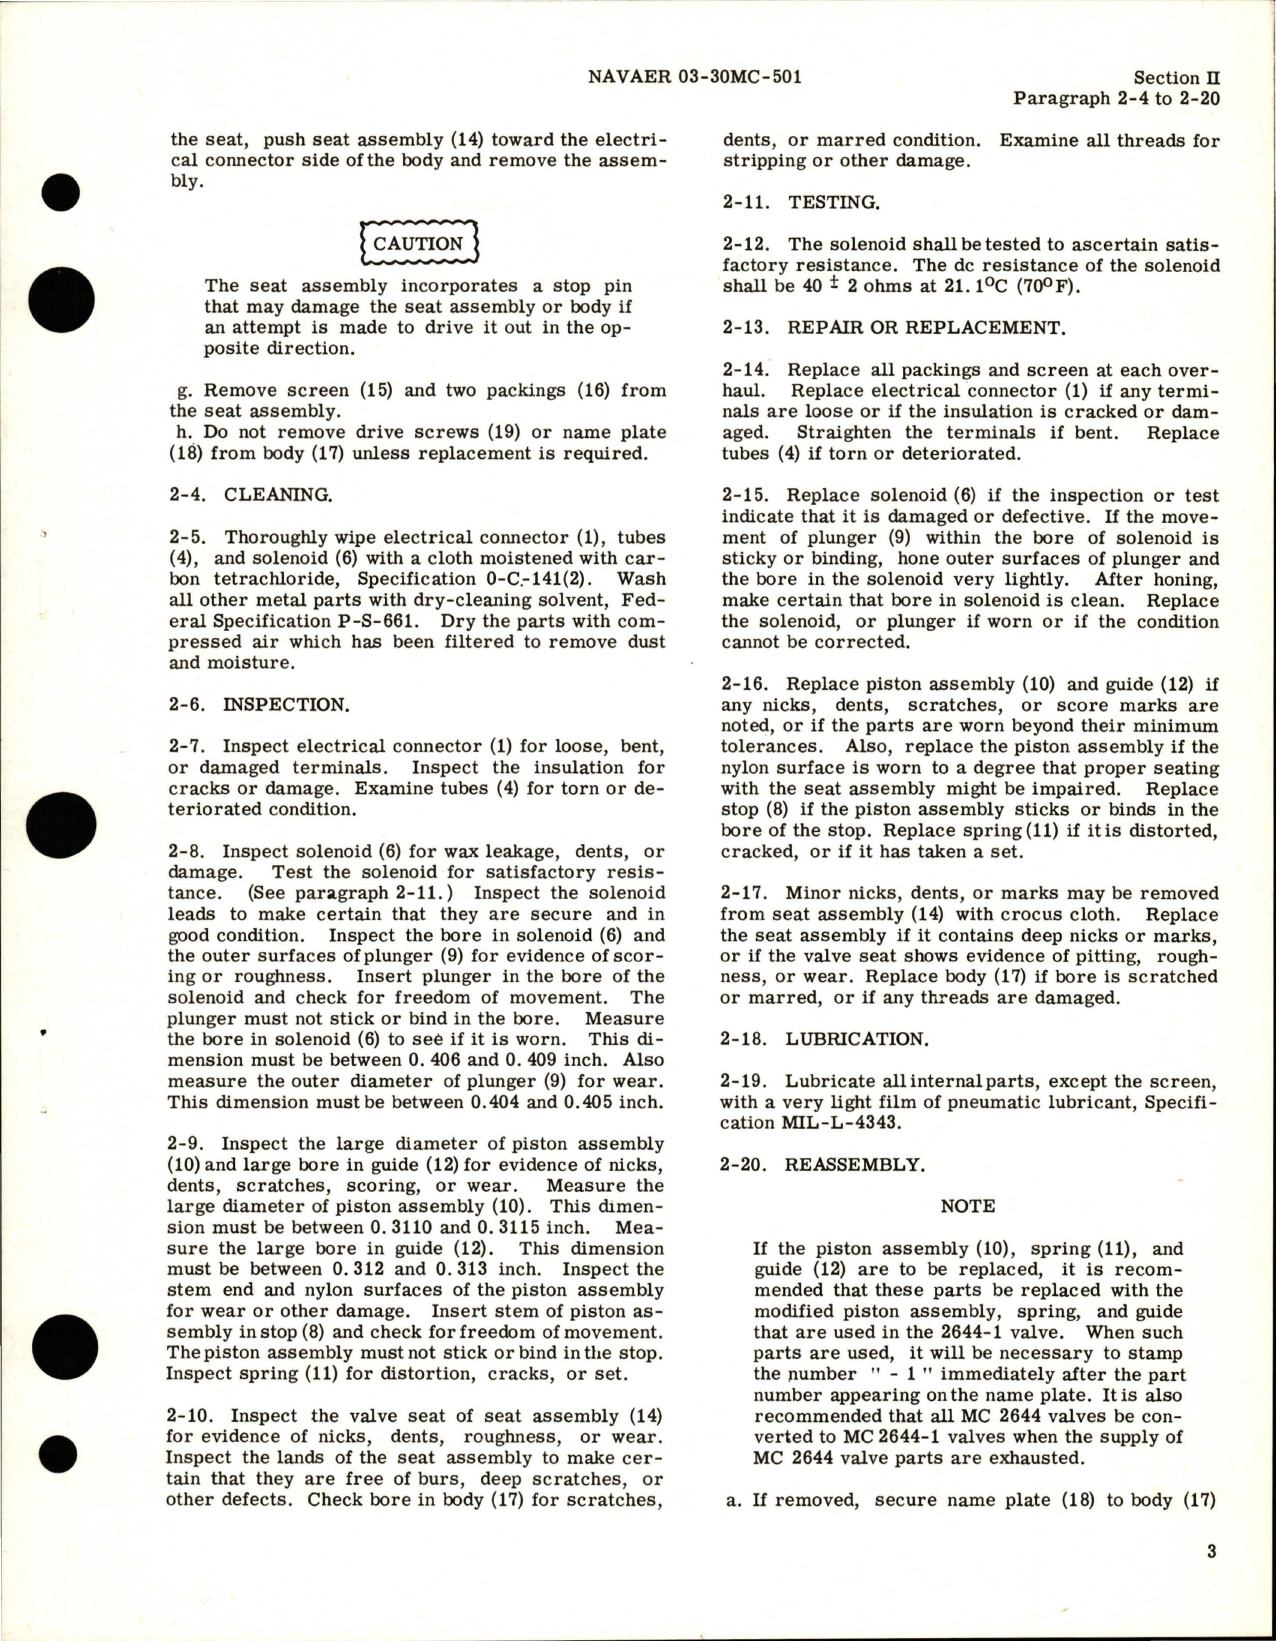 Sample page 5 from AirCorps Library document: Overhaul Instructions for Solenoid Operated Pneumatic Shutoff Valve - Parts MC 2644 and MC 2644-1